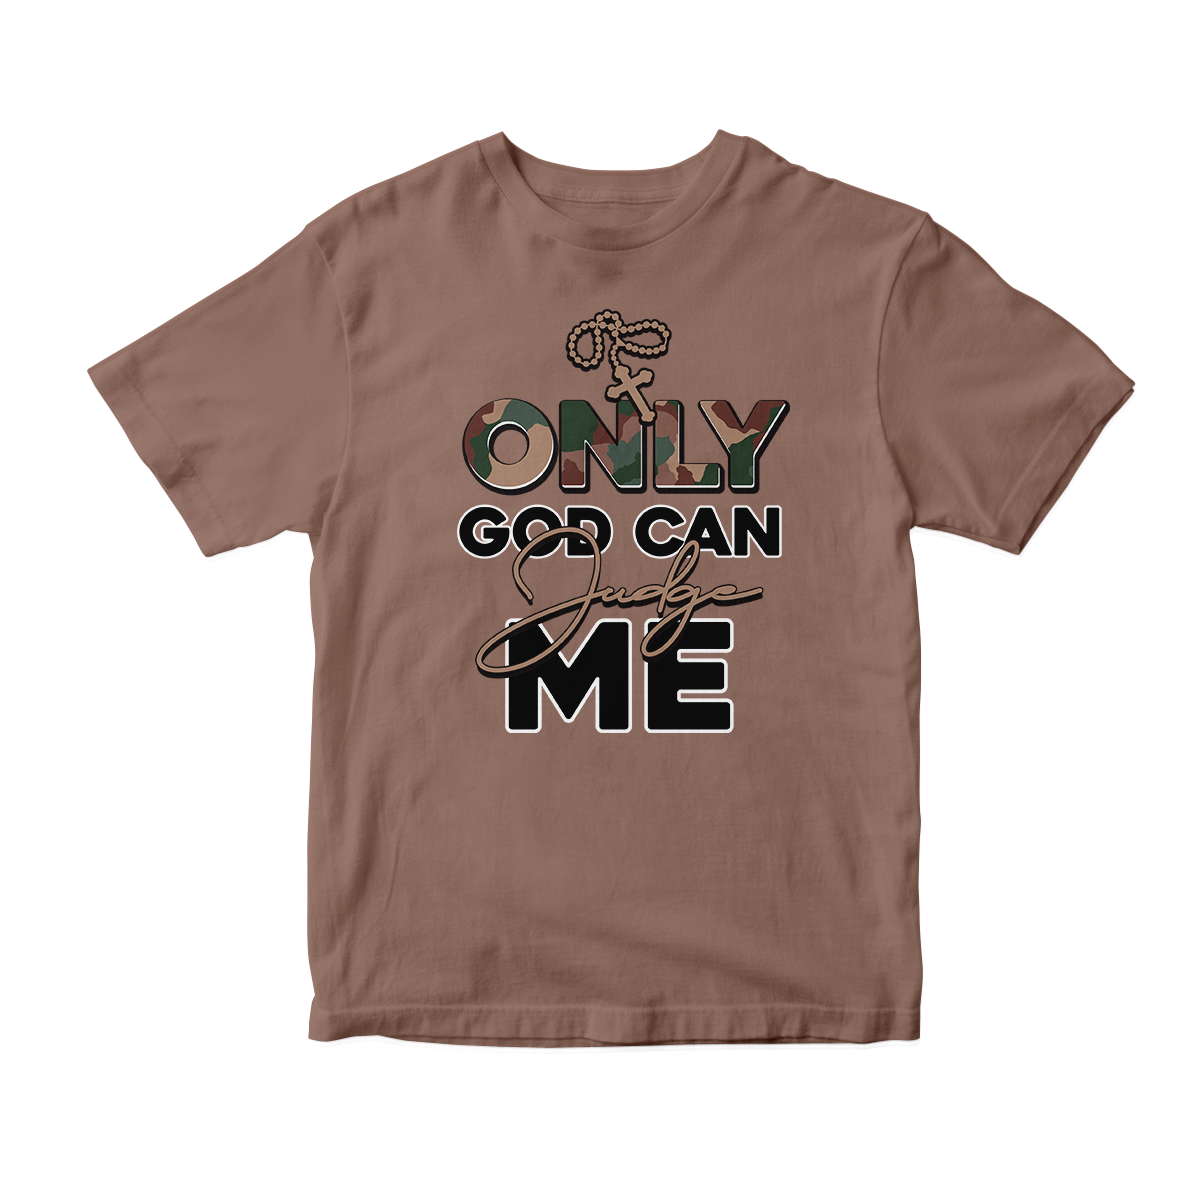 'Only God Can Judge Me' in Woodland CW Short Sleeve Tee